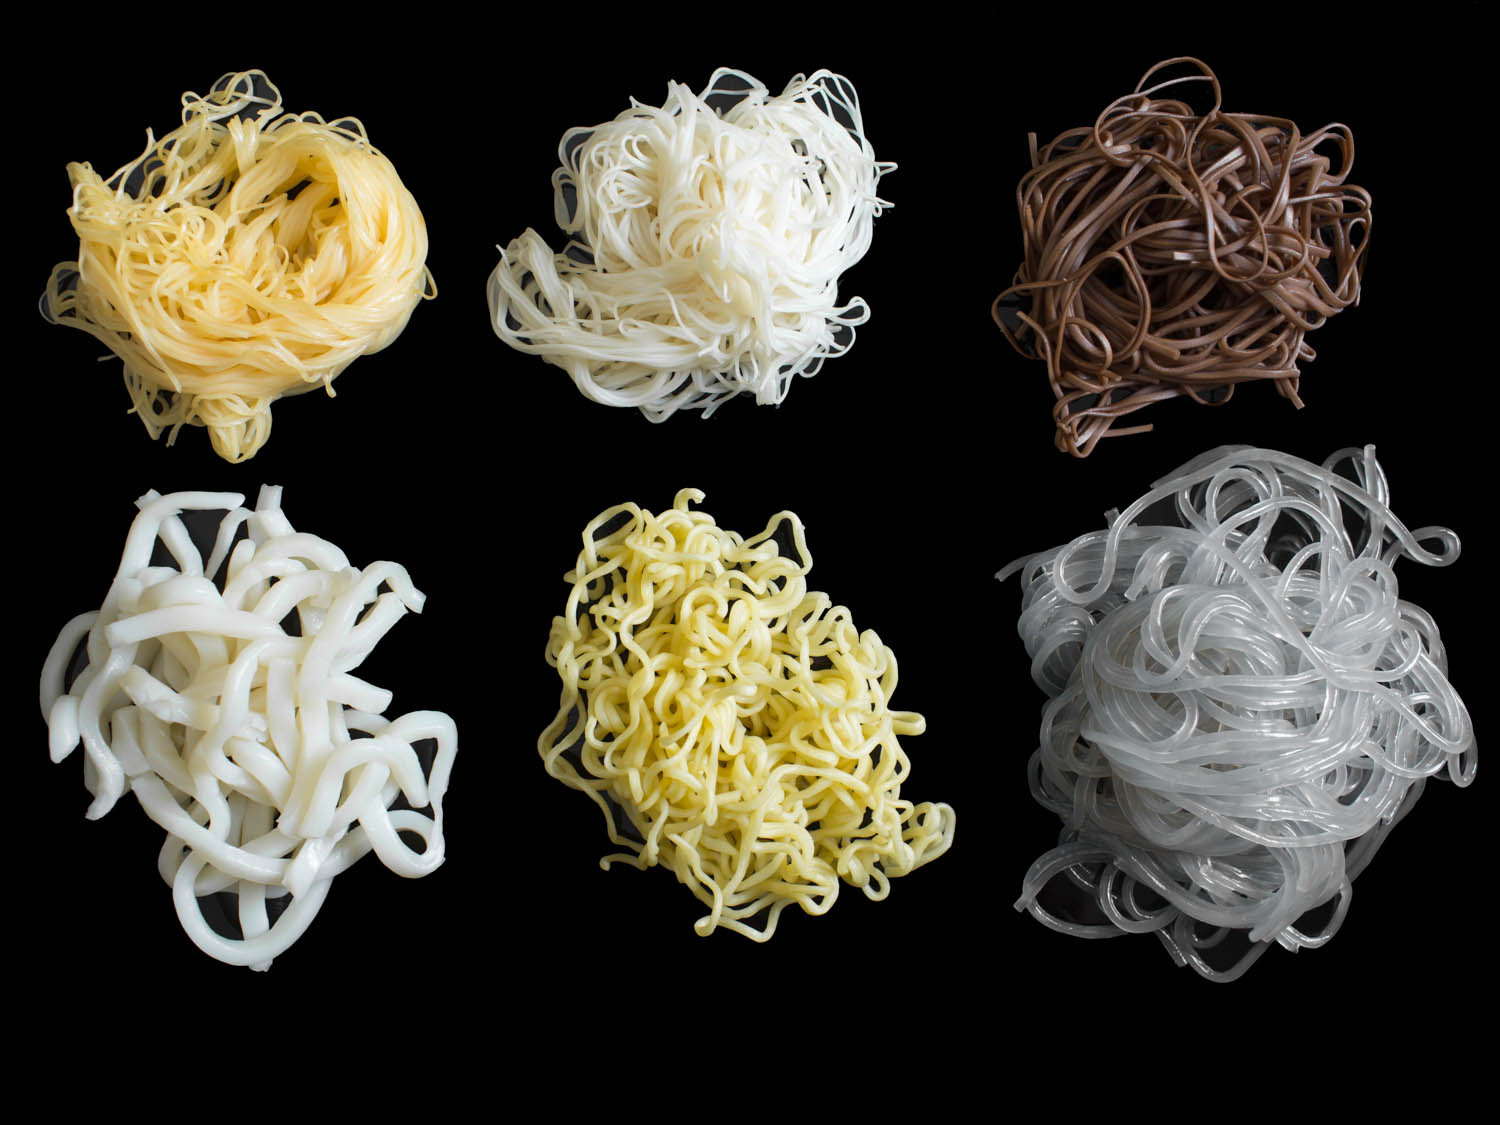 White Chinese Noodles The Serious Eats Guide to Shopping for Asian Noodles